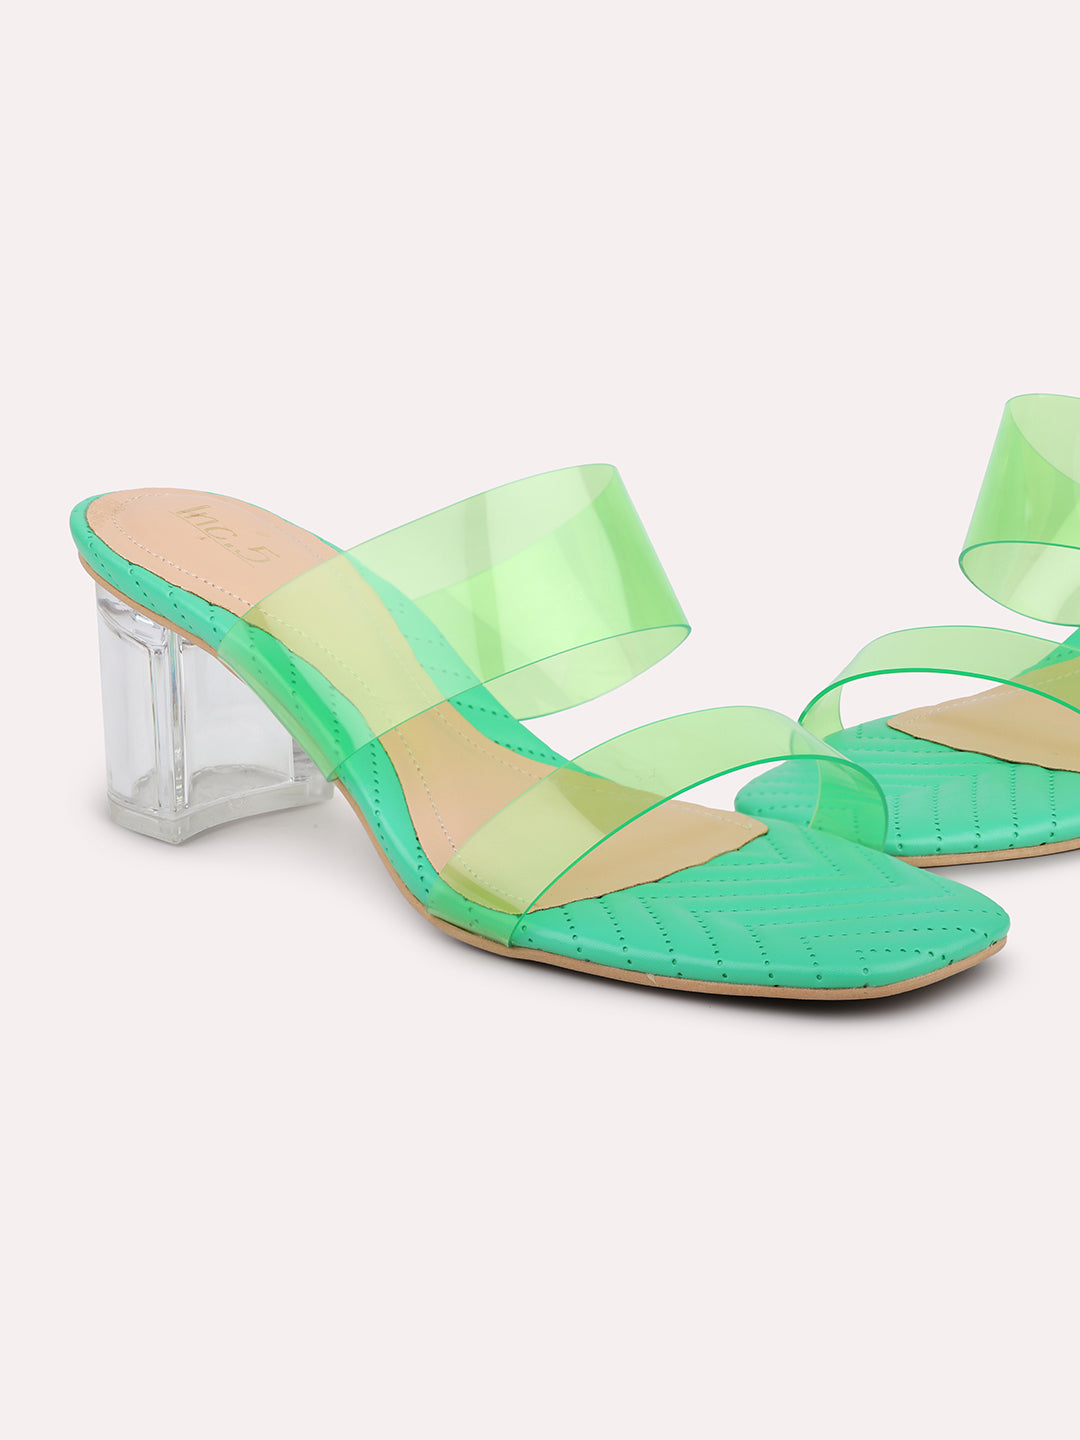 Neon Green Valentine High Heel Sandals 777 12.5cm & 3.75cm Platform,  Transparent Block Heels, Chunky Stripper Shoes For Women Perfect For Summer  2020 From Casualshoess, $36.23 | DHgate.Com